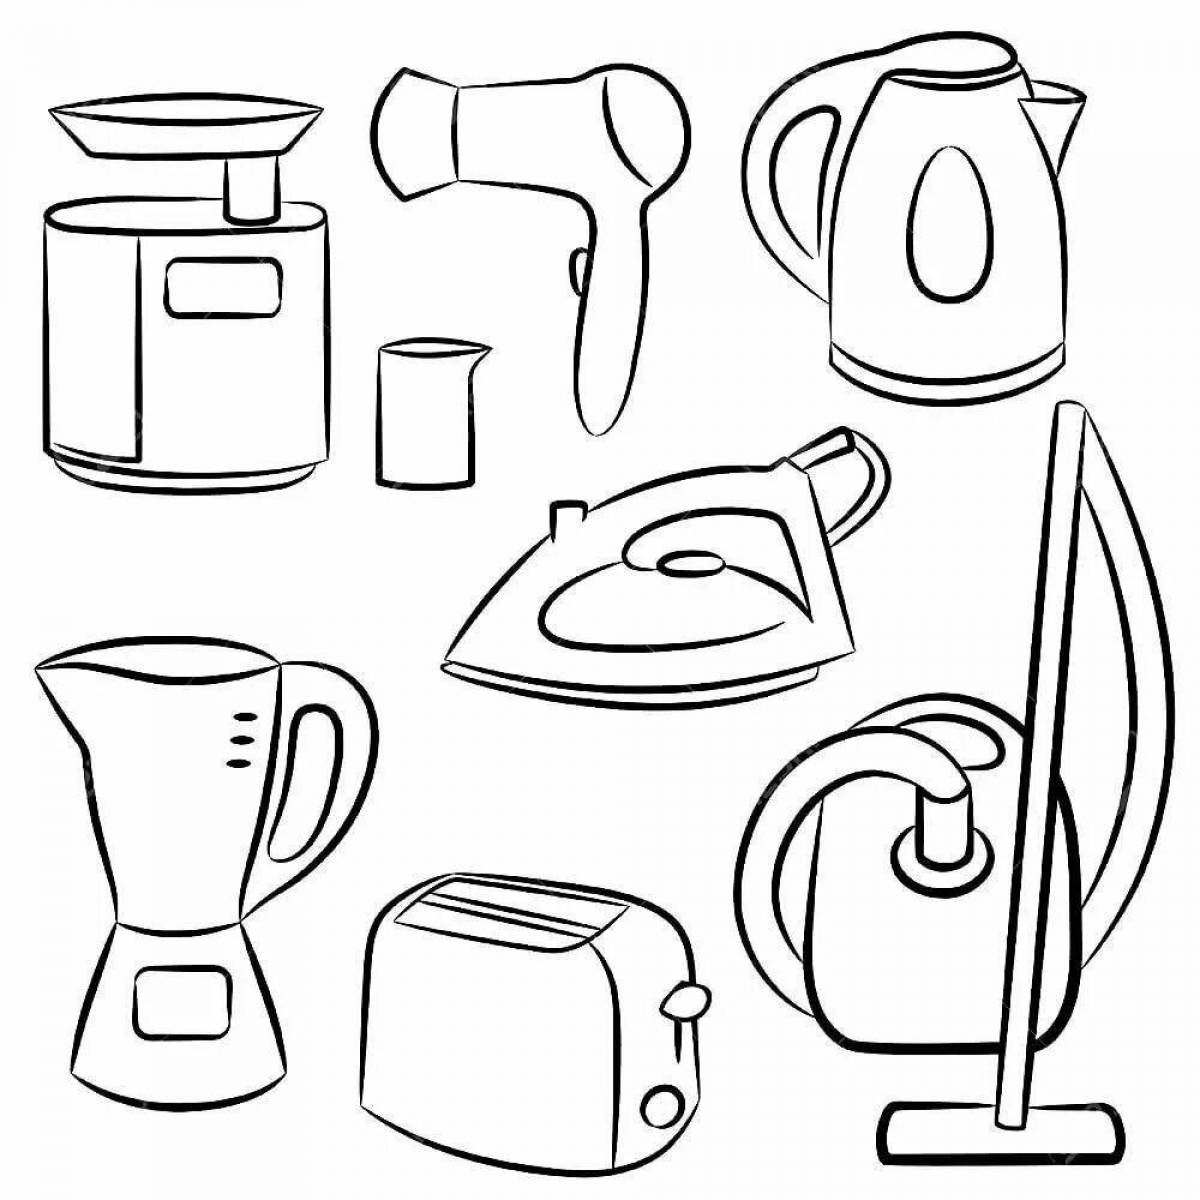 Creative household appliances coloring pages for 5-6 year olds